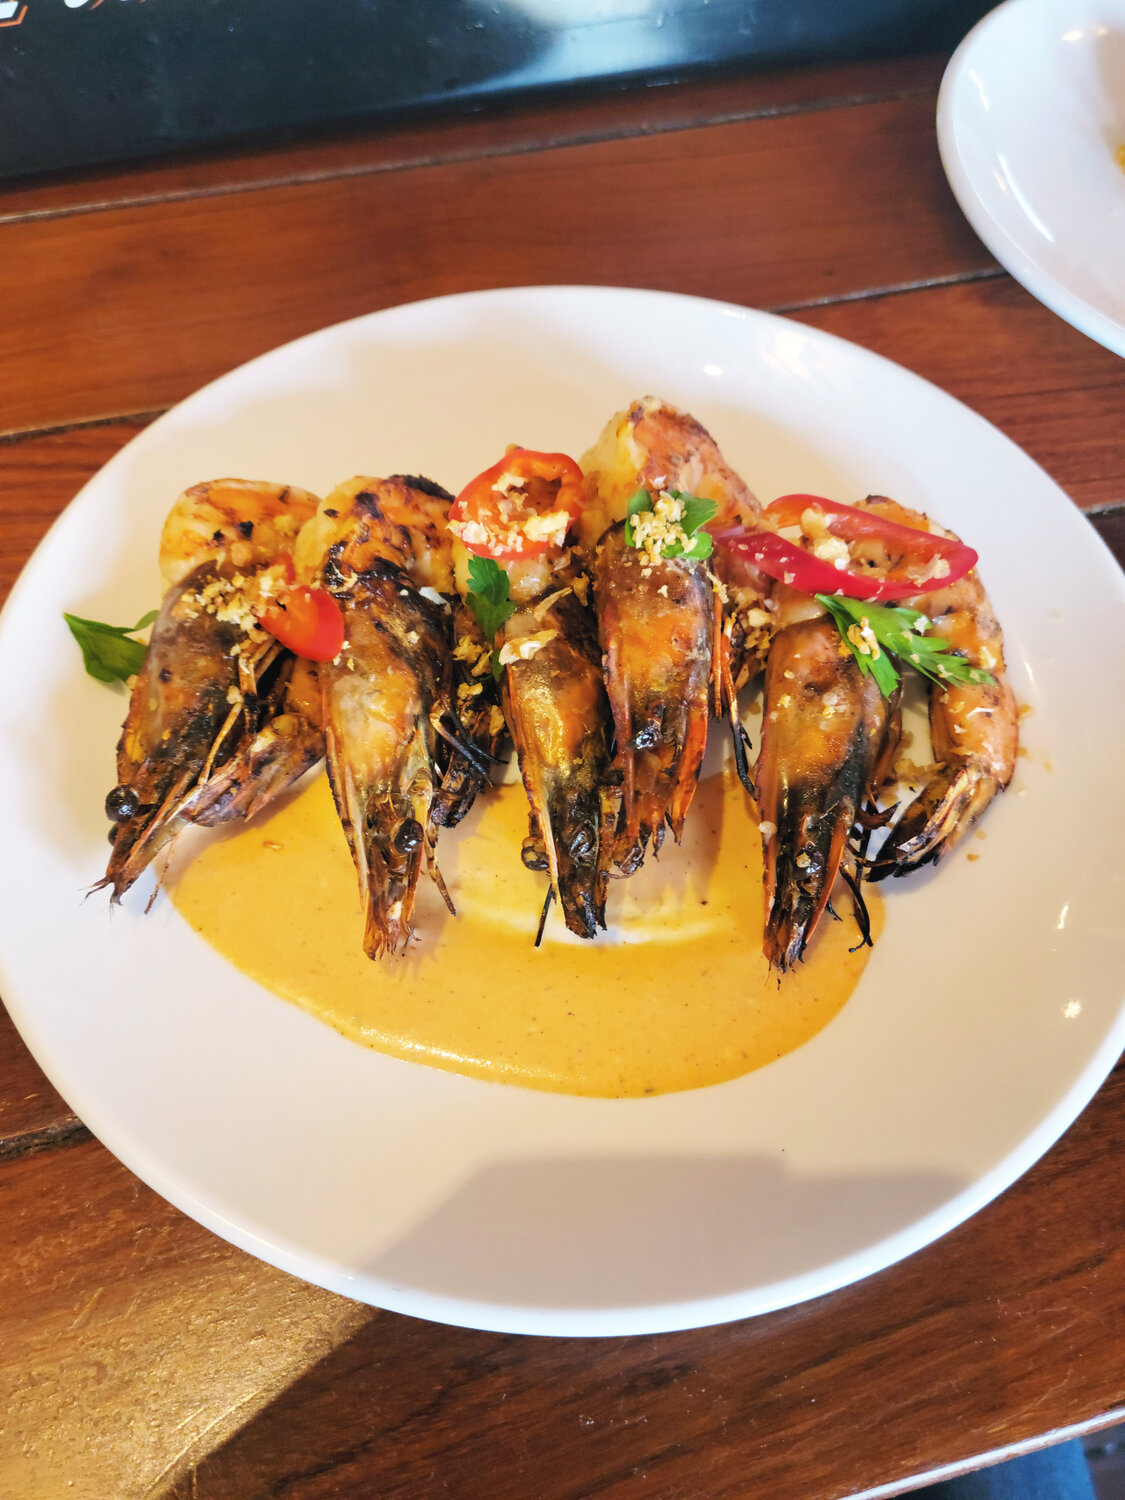 Chef Liam Jacobs’ peri peri prawns are gently grilled and served over a spicy chile aioli. There are enough for an app to share or an entrée.